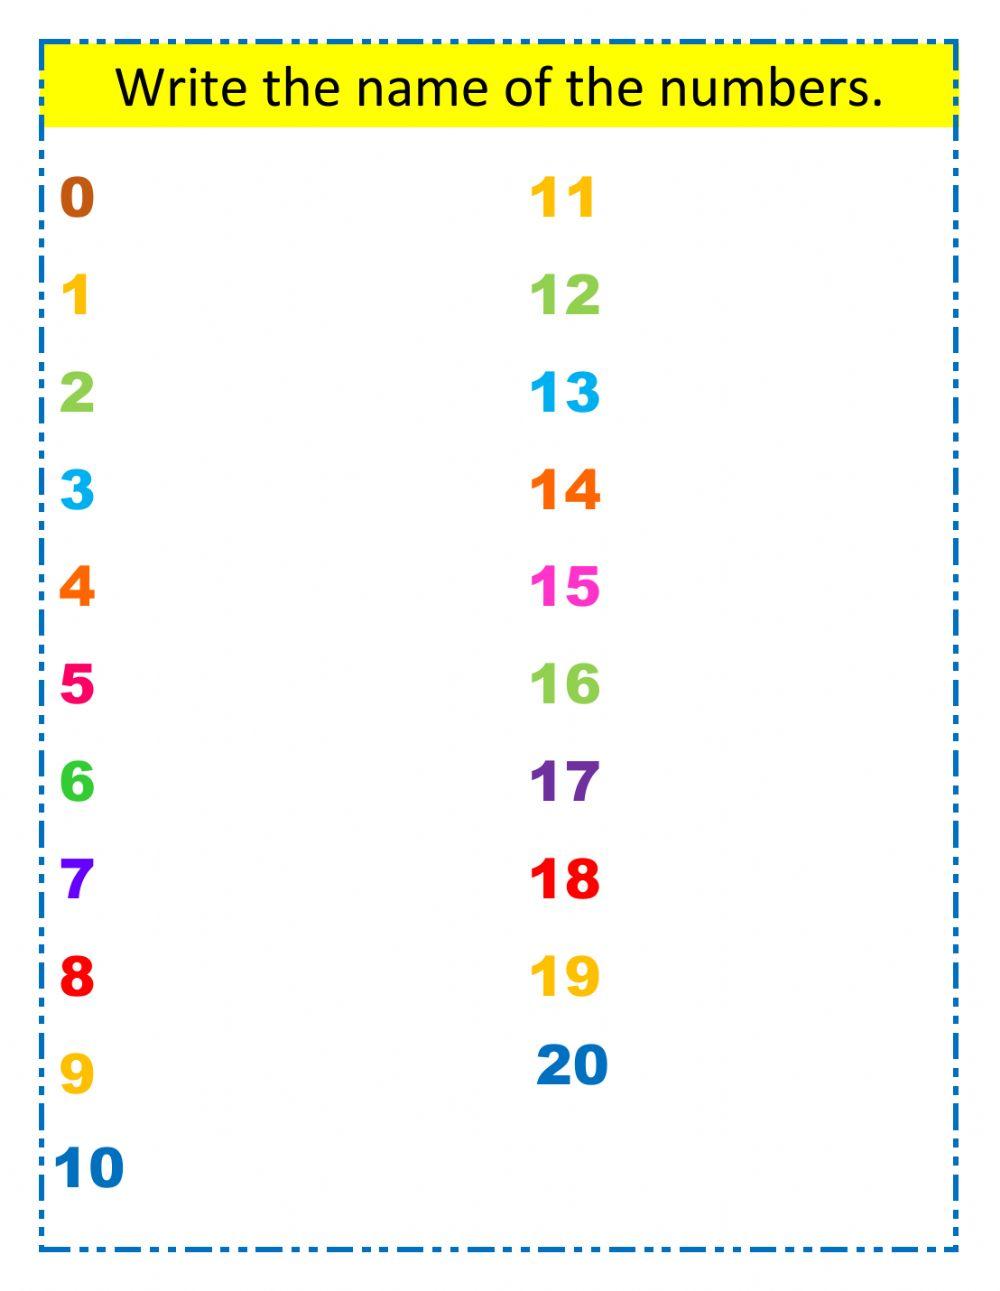 Numbers from 1 to 20